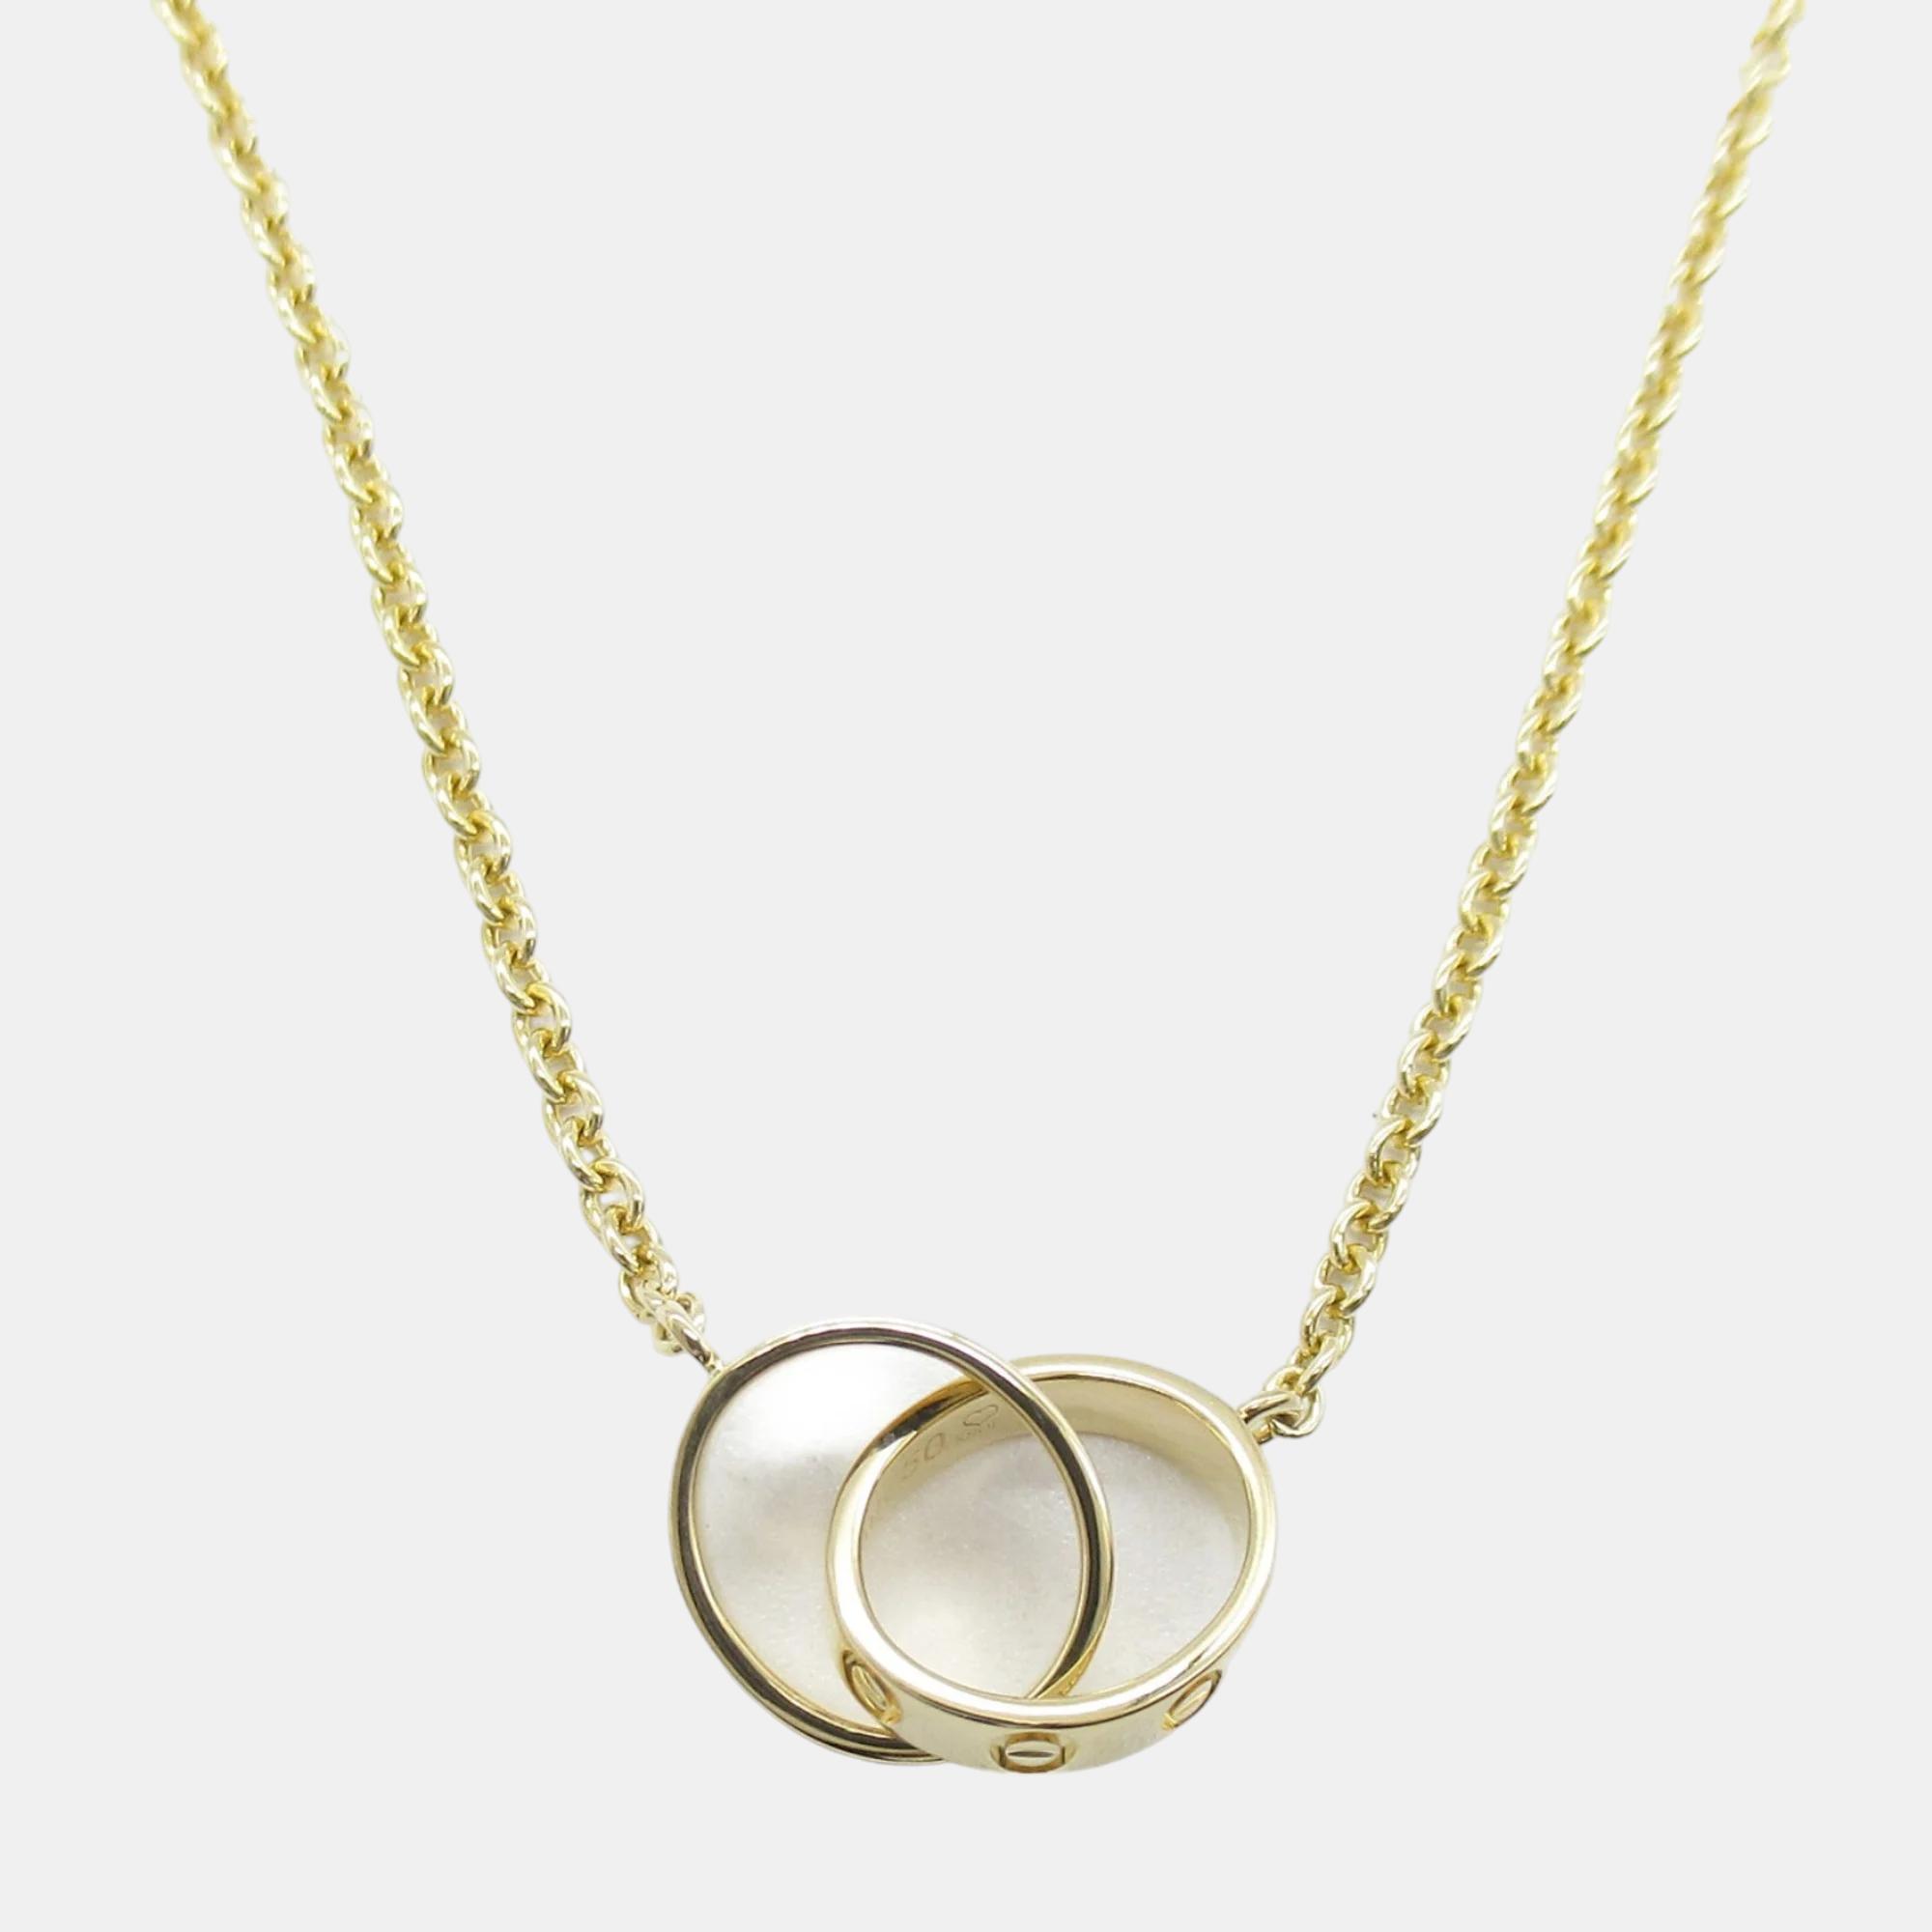 Cartier 18k yellow gold love pendant necklace